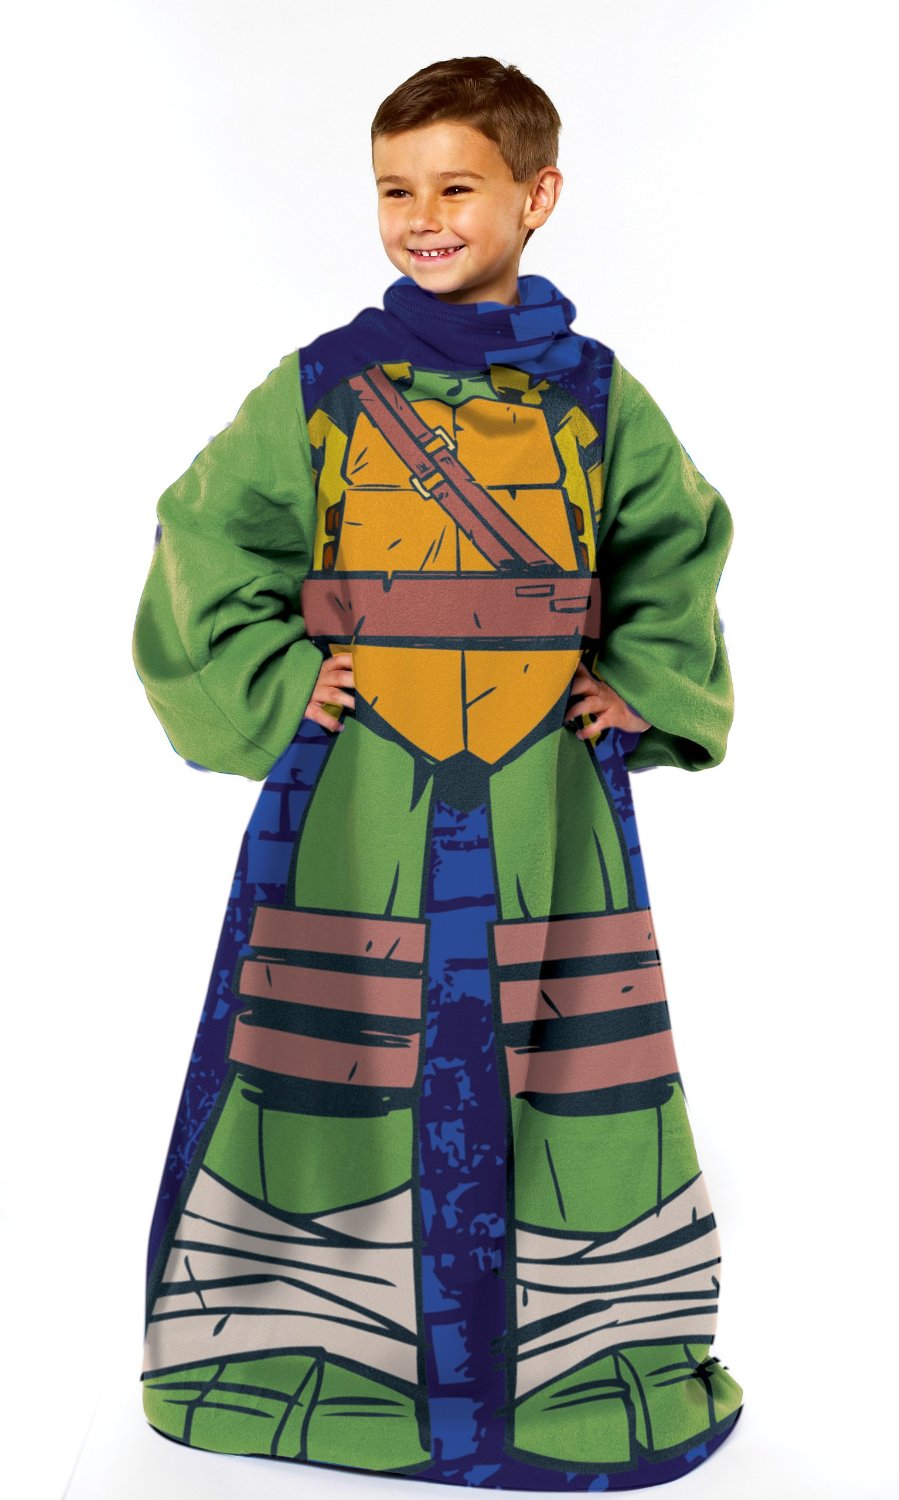 TMNT “Being Leo” Youth Comfy Throw Only $8.77 – 63% Savings!